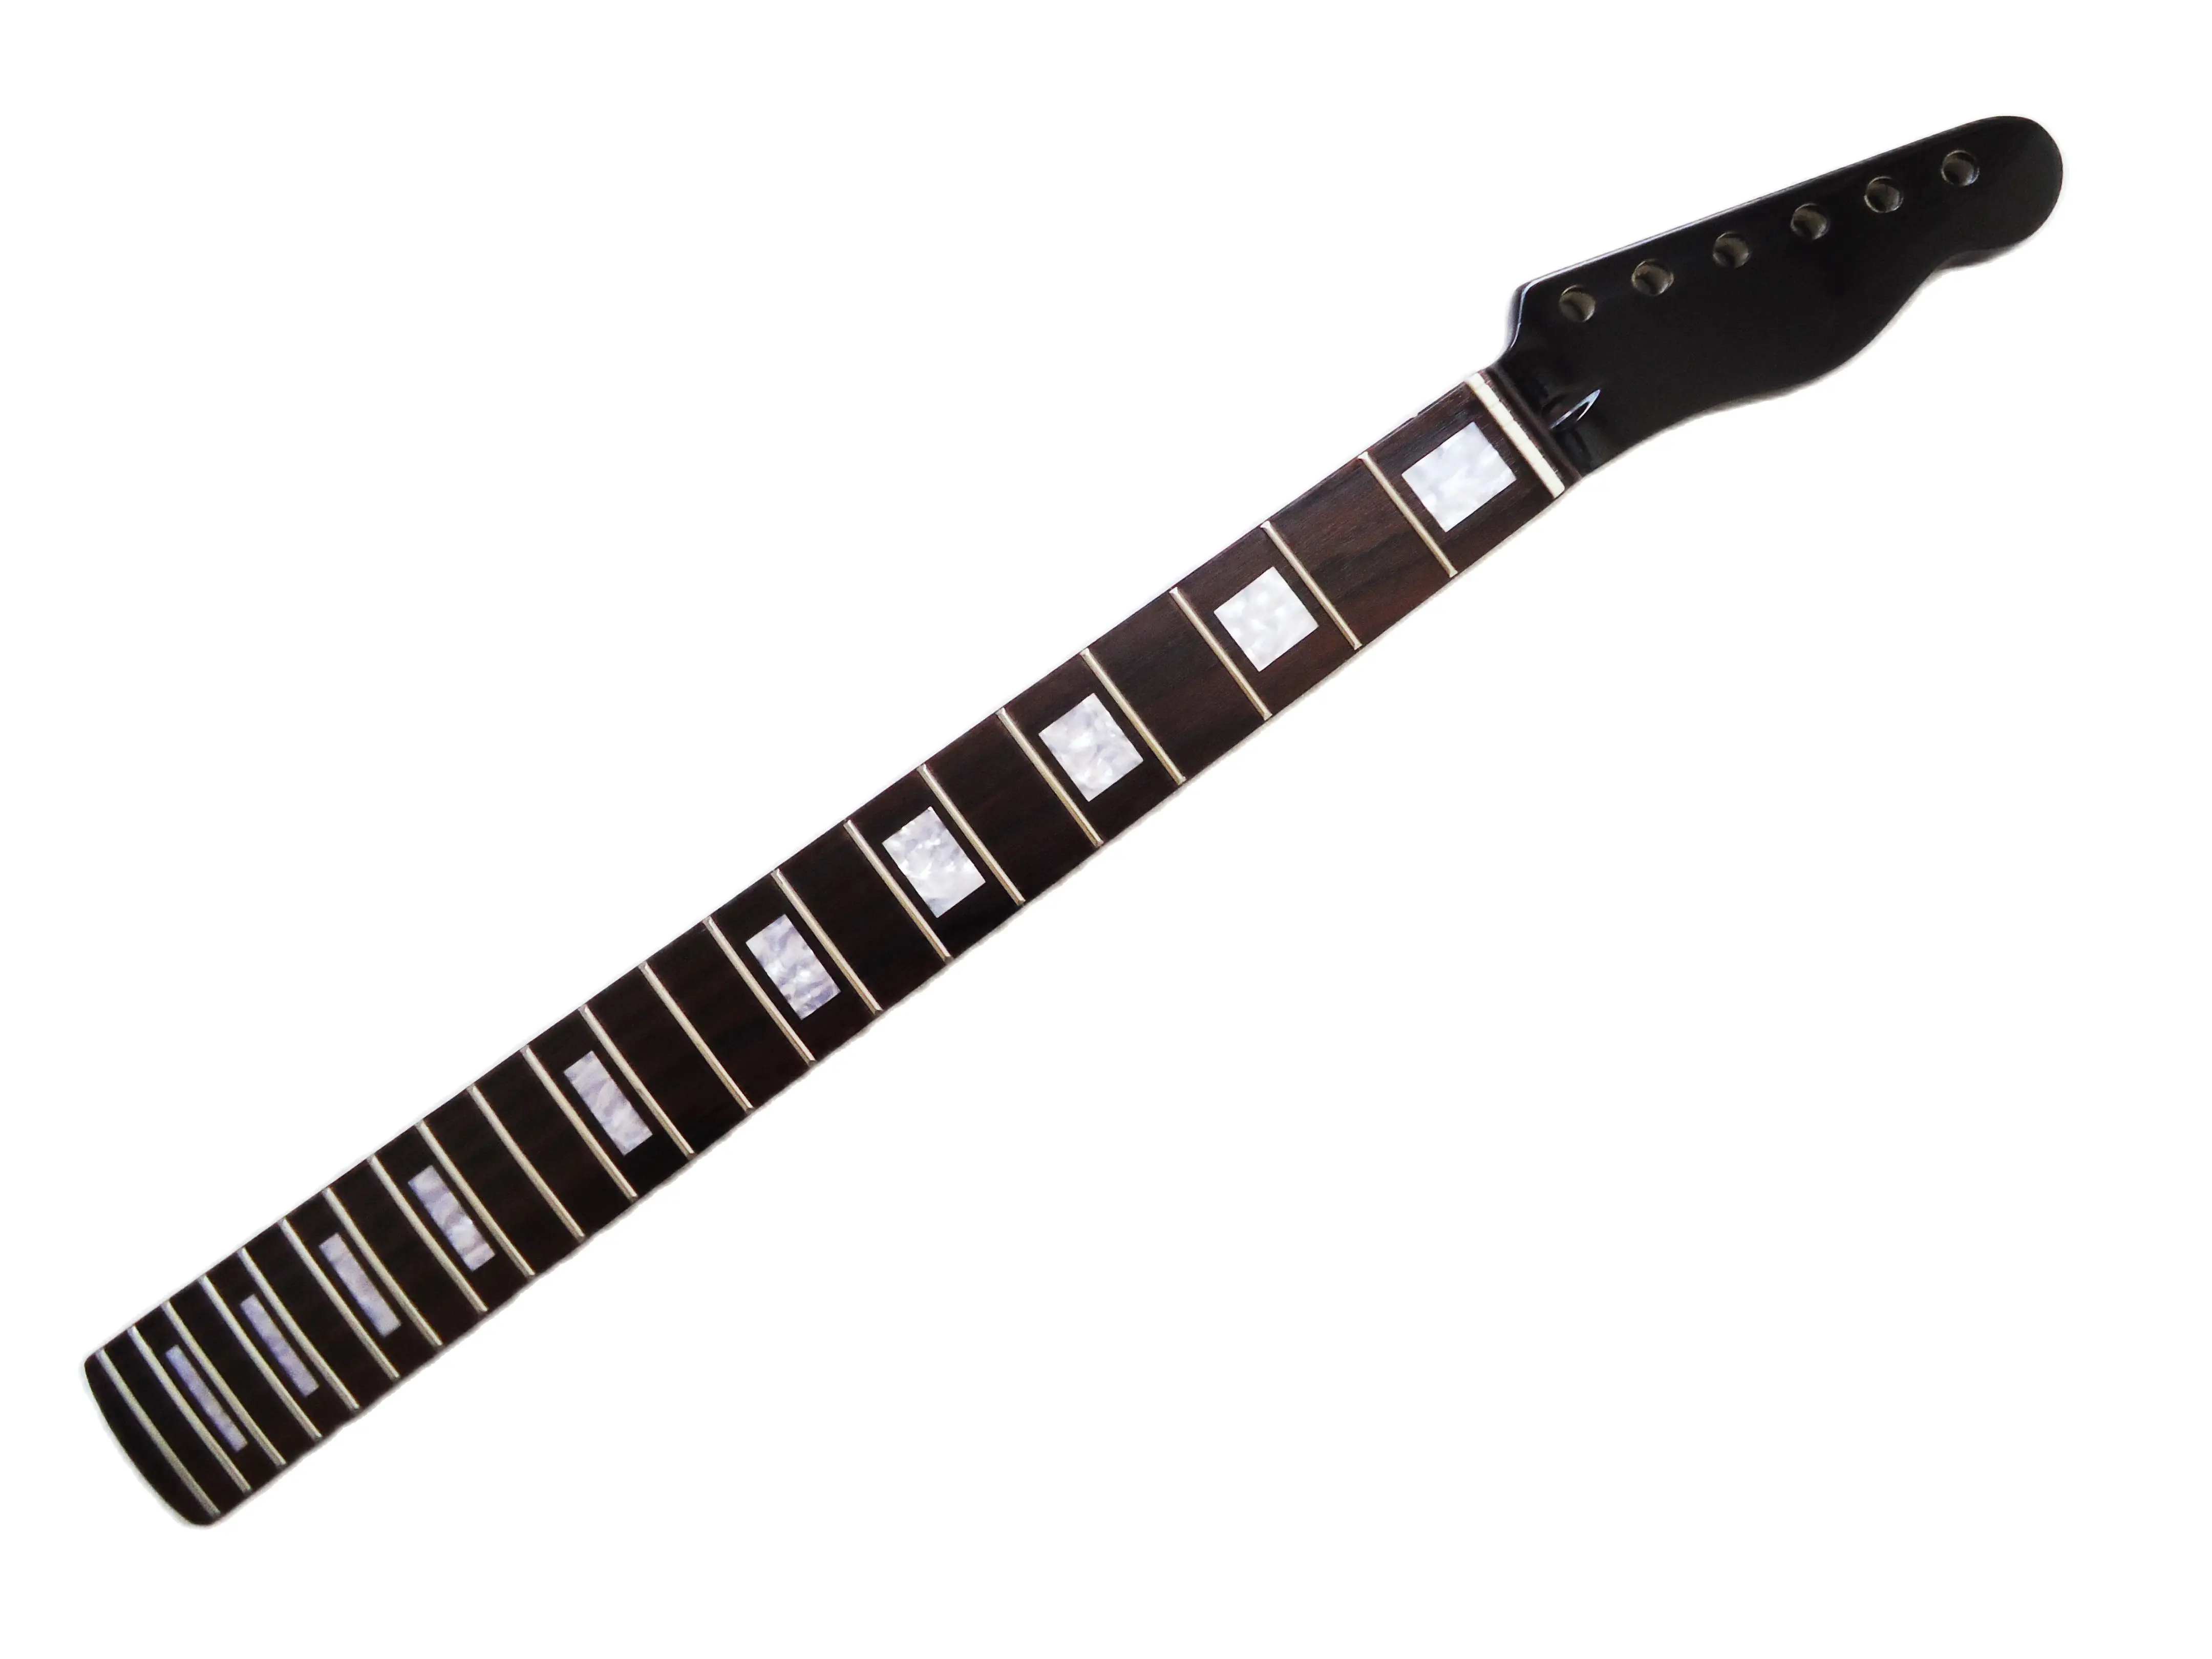 Enlarge 22-Fret TL Style Electric Guitar Neck Classic White Block Inlay Rosewood Fingerboard Canadian Maple Black Color(1pc,Free Logo)